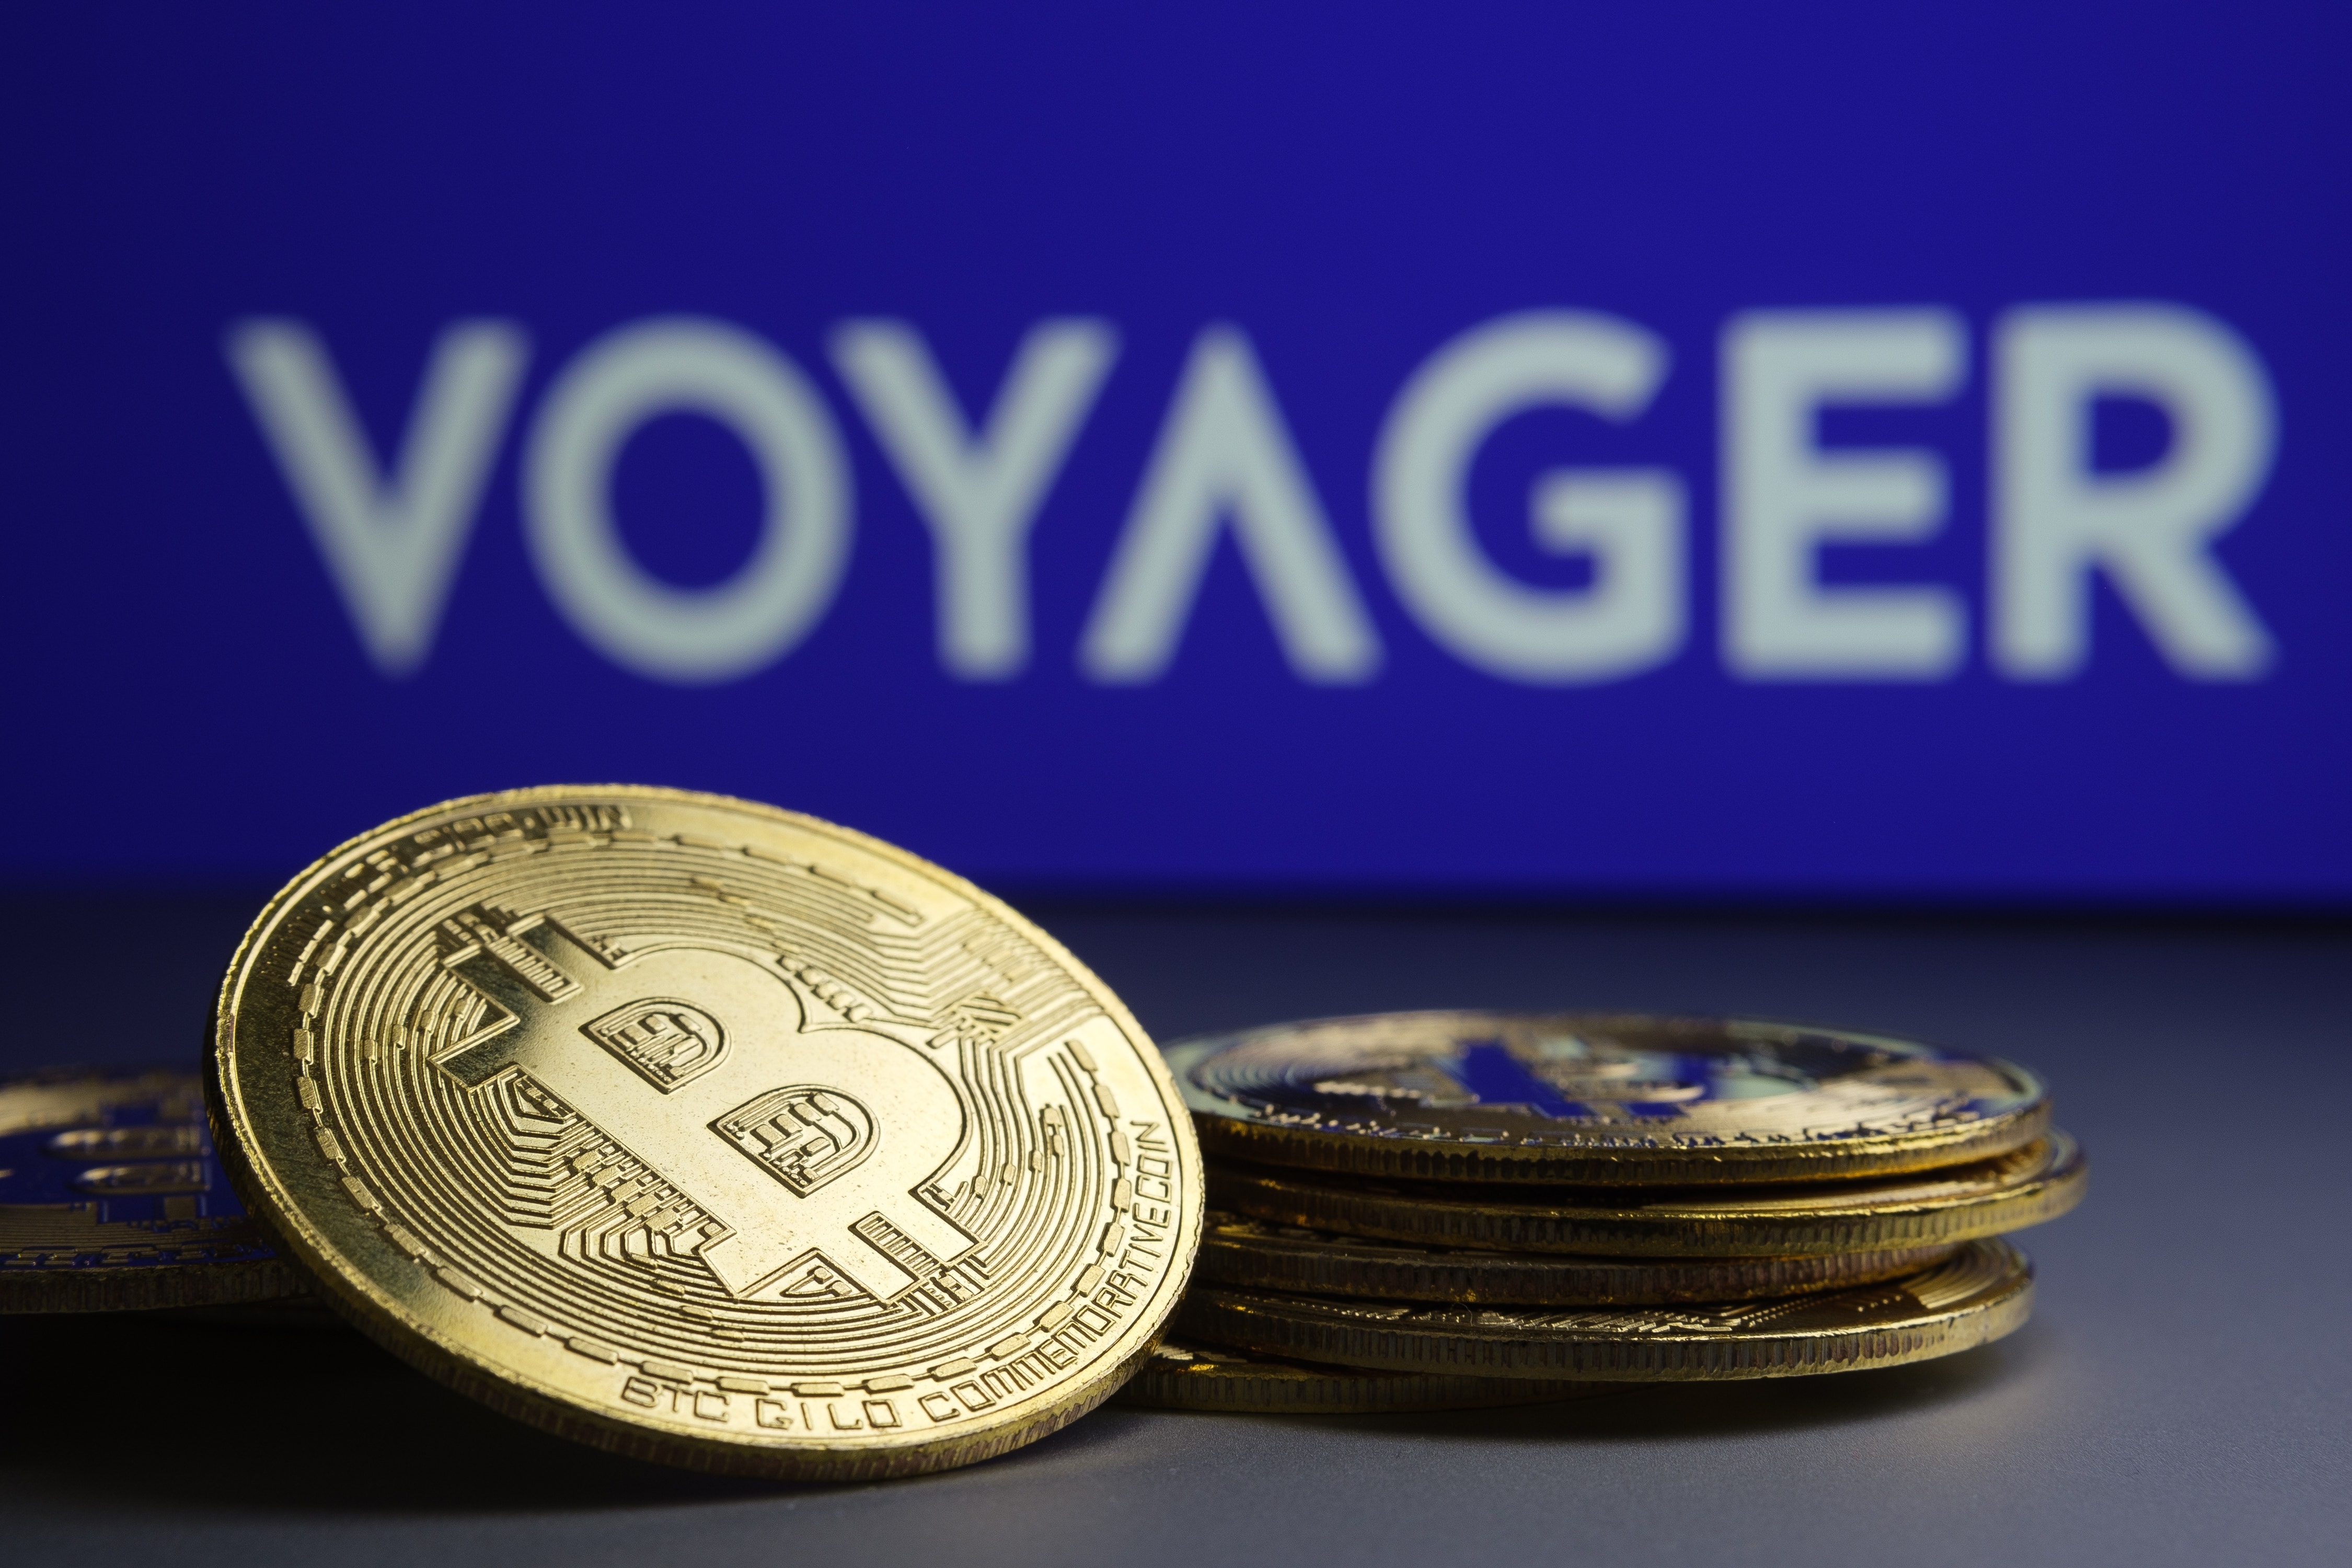 Sam Bankman-Fried's FTX, Binance Reportedly In The Lead To Buy Voyager Digital's Assets